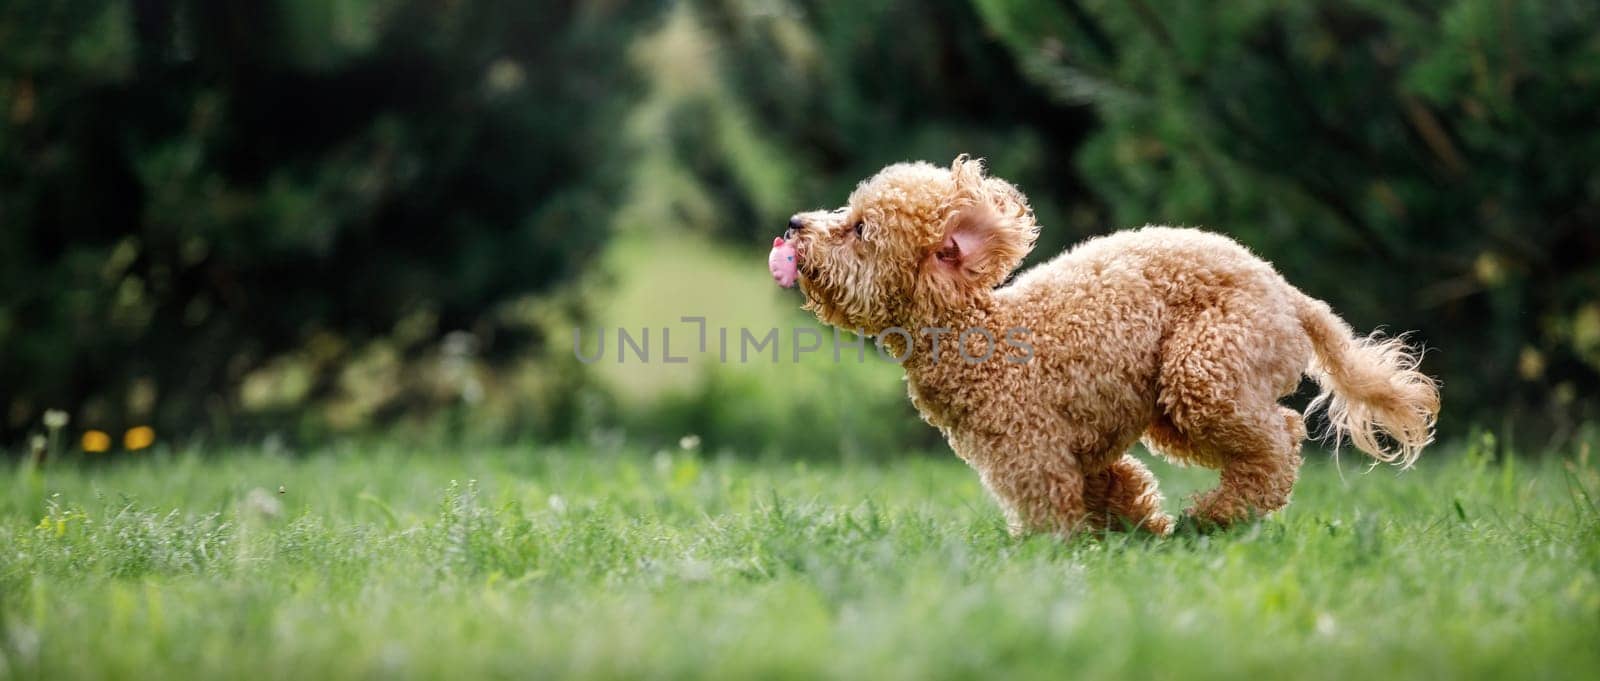 Little dog poodle flying fast on the grass. The dog bites a pink rubber toy. A panoramic photo suitable for a banner has free space for text by Lincikas